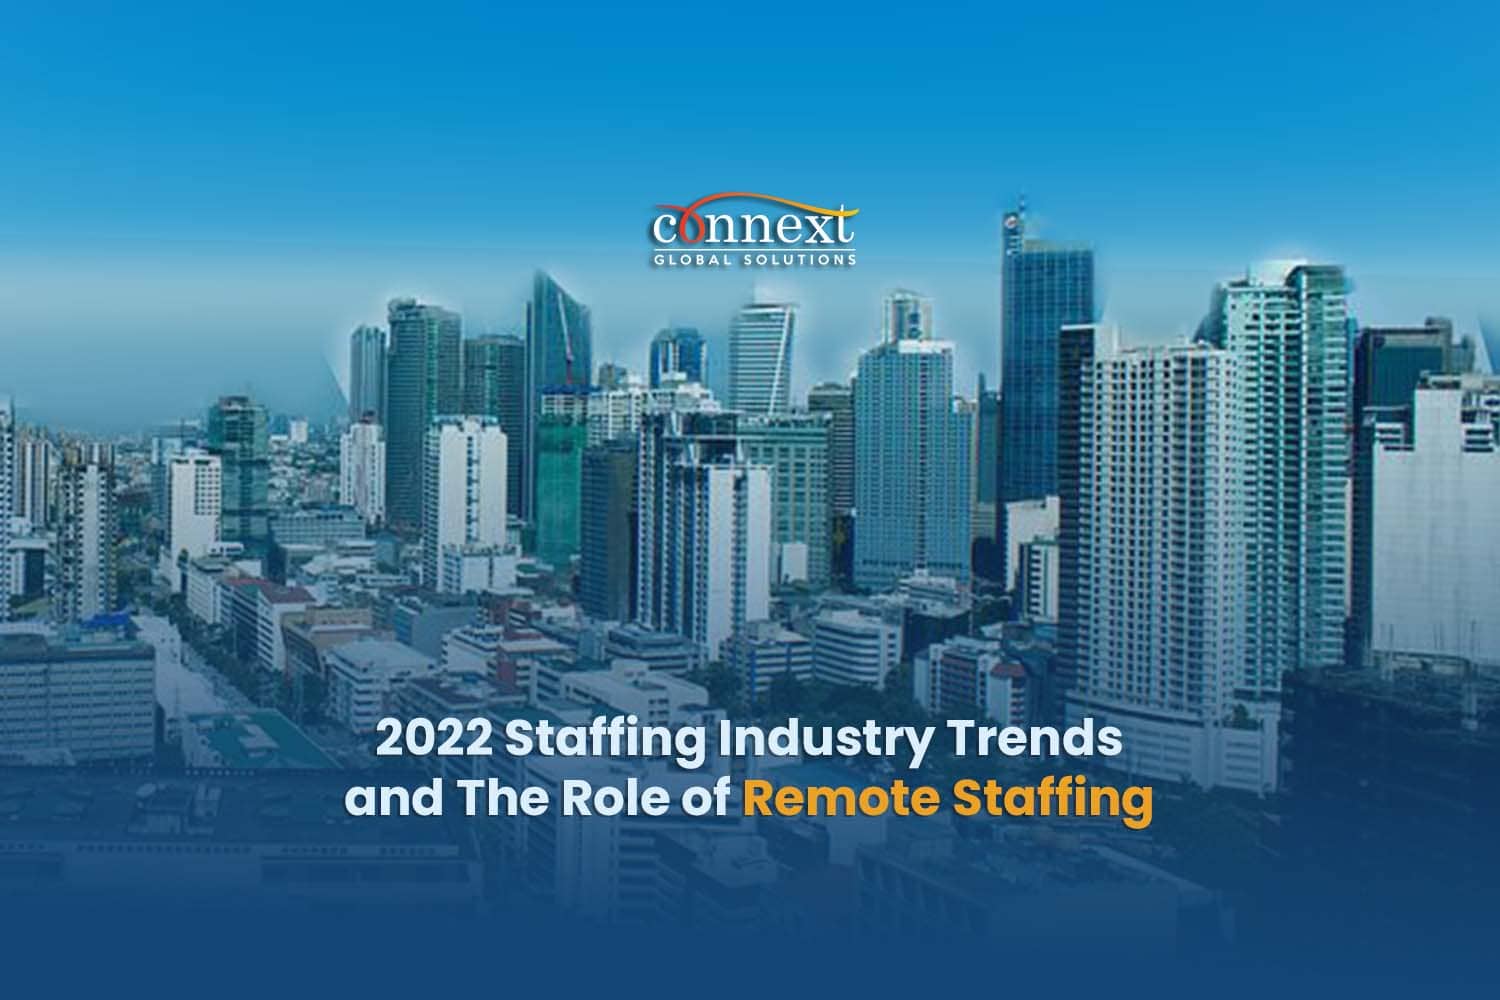 2022 Staffing Industry Trends and The Role of Remote Staffing